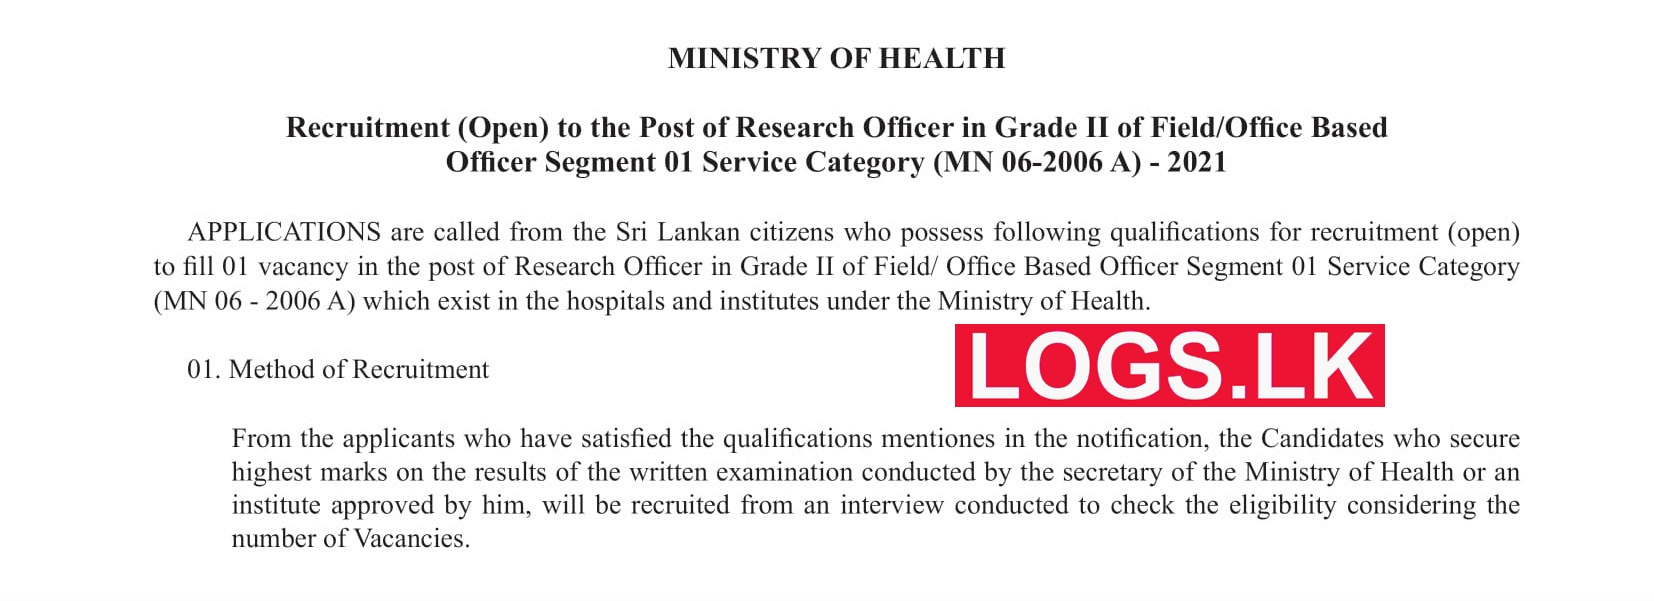 Recruitment (Open) to the Post of Research Officer in Grade II of the Ministry of Health – 2021